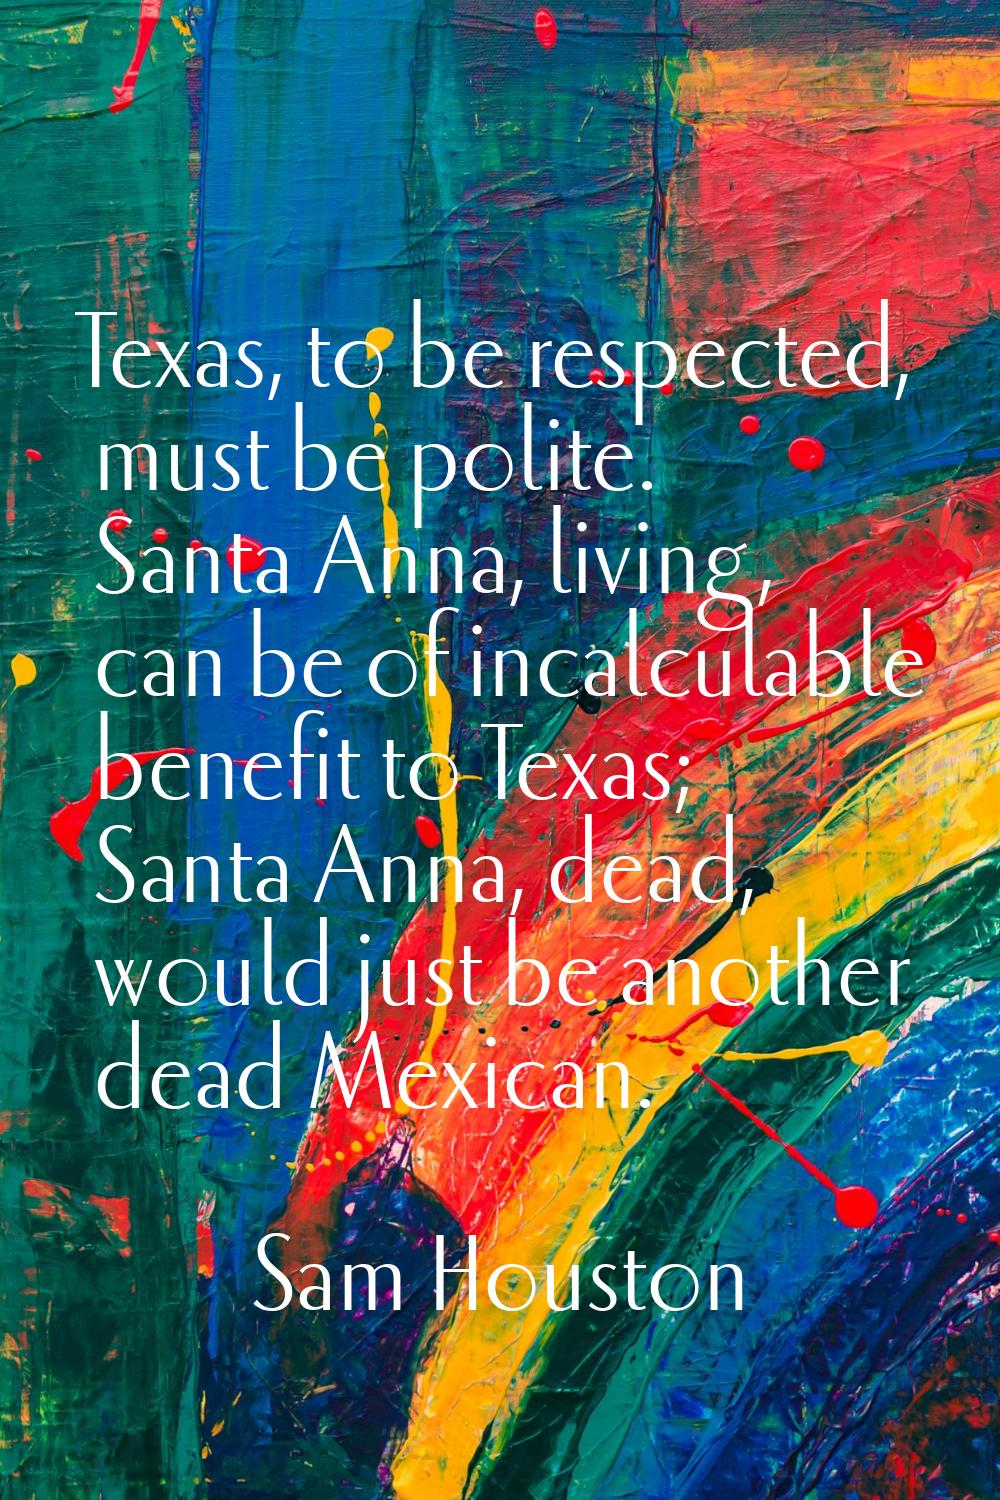 Texas, to be respected, must be polite. Santa Anna, living, can be of incalculable benefit to Texas